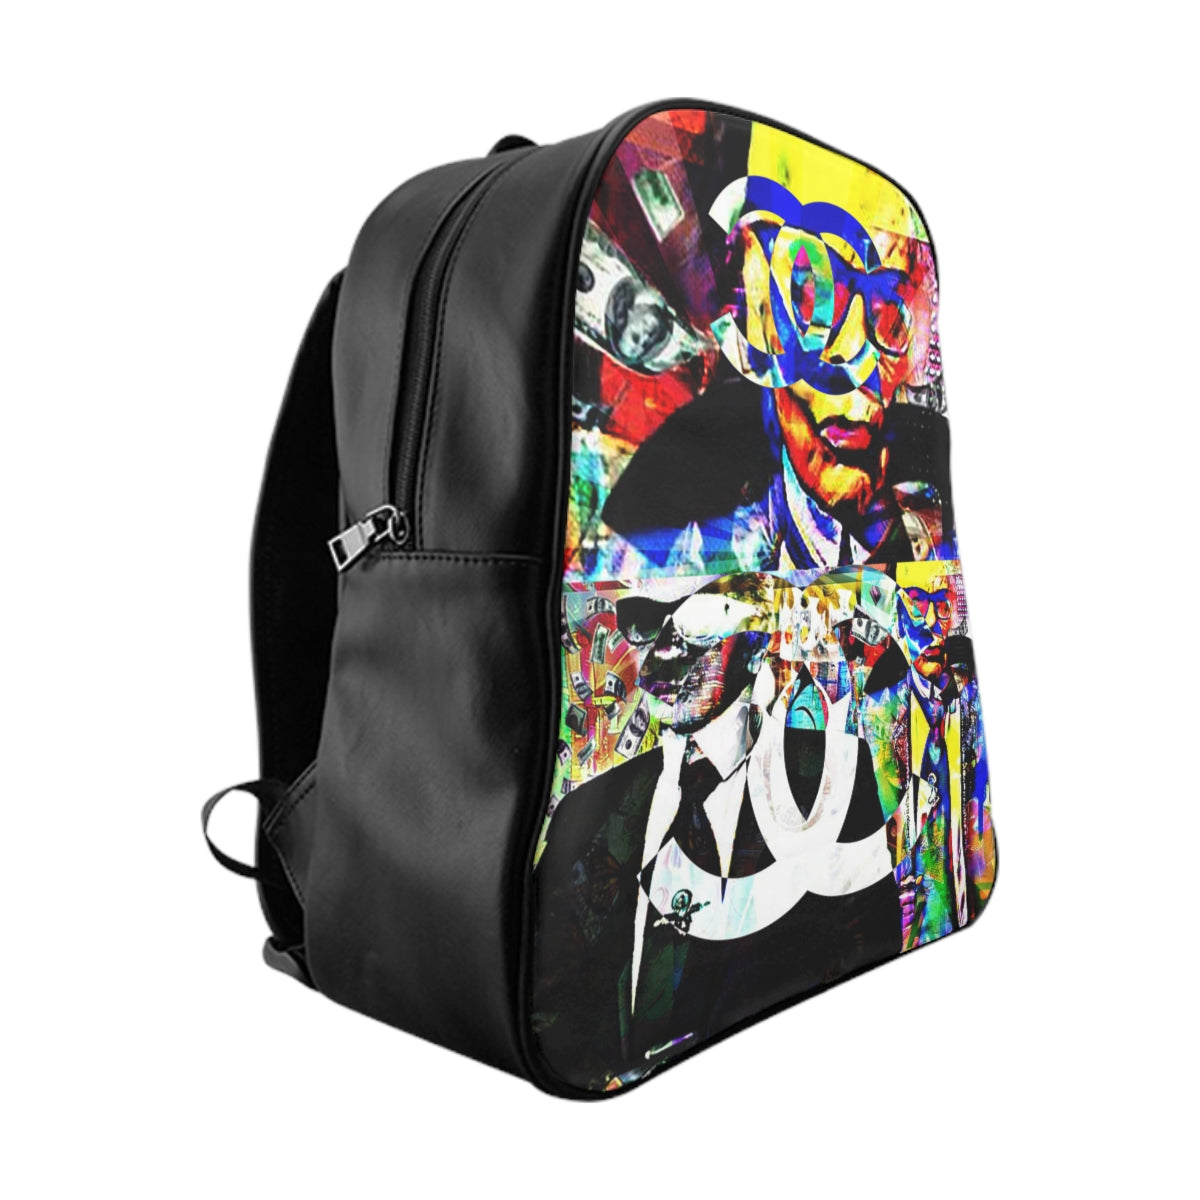 Getrott Inspired by C h a n e l Graffiti School Backpack Carry-On Travel Check Luggage 4-Wheel Spinner Suitcase Bag Multiple Colors and Sizes